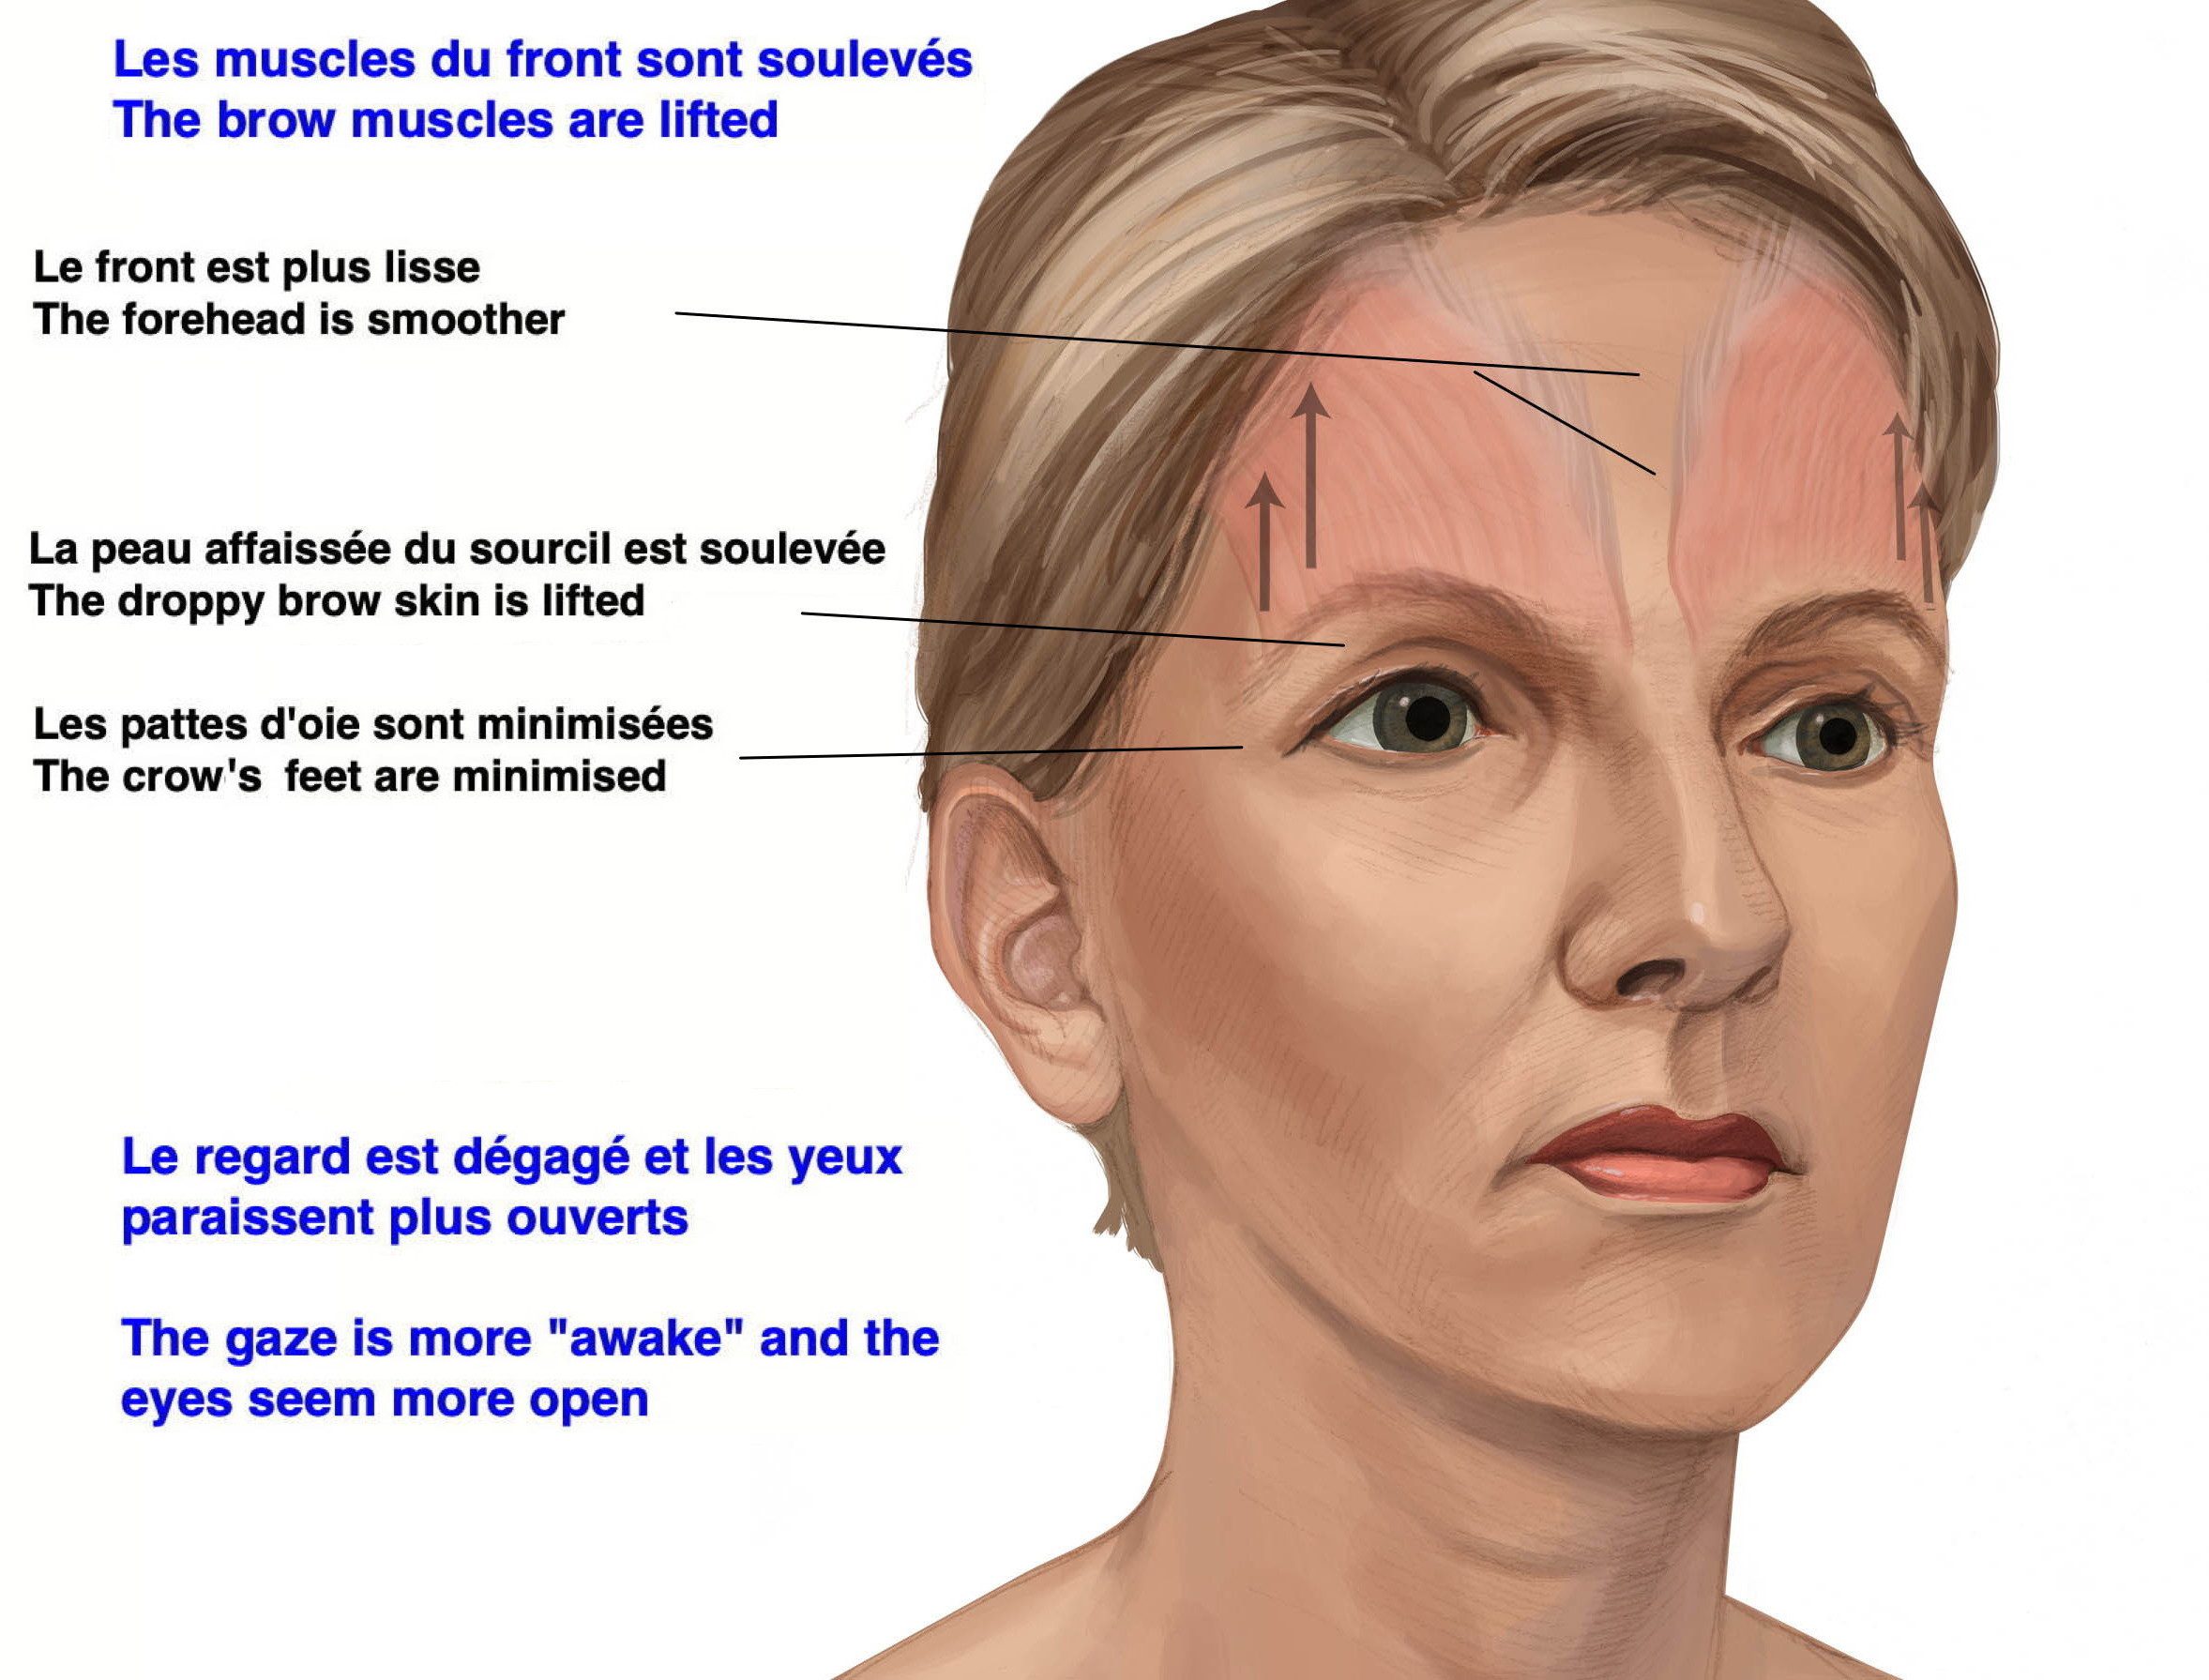 Figure 2 (b): Brow lift procedure shown where the muscle of the forehead is lifted to reposition the brows, recover the arch, eliminate the excess skin and improve he wrinkles in the forehead.